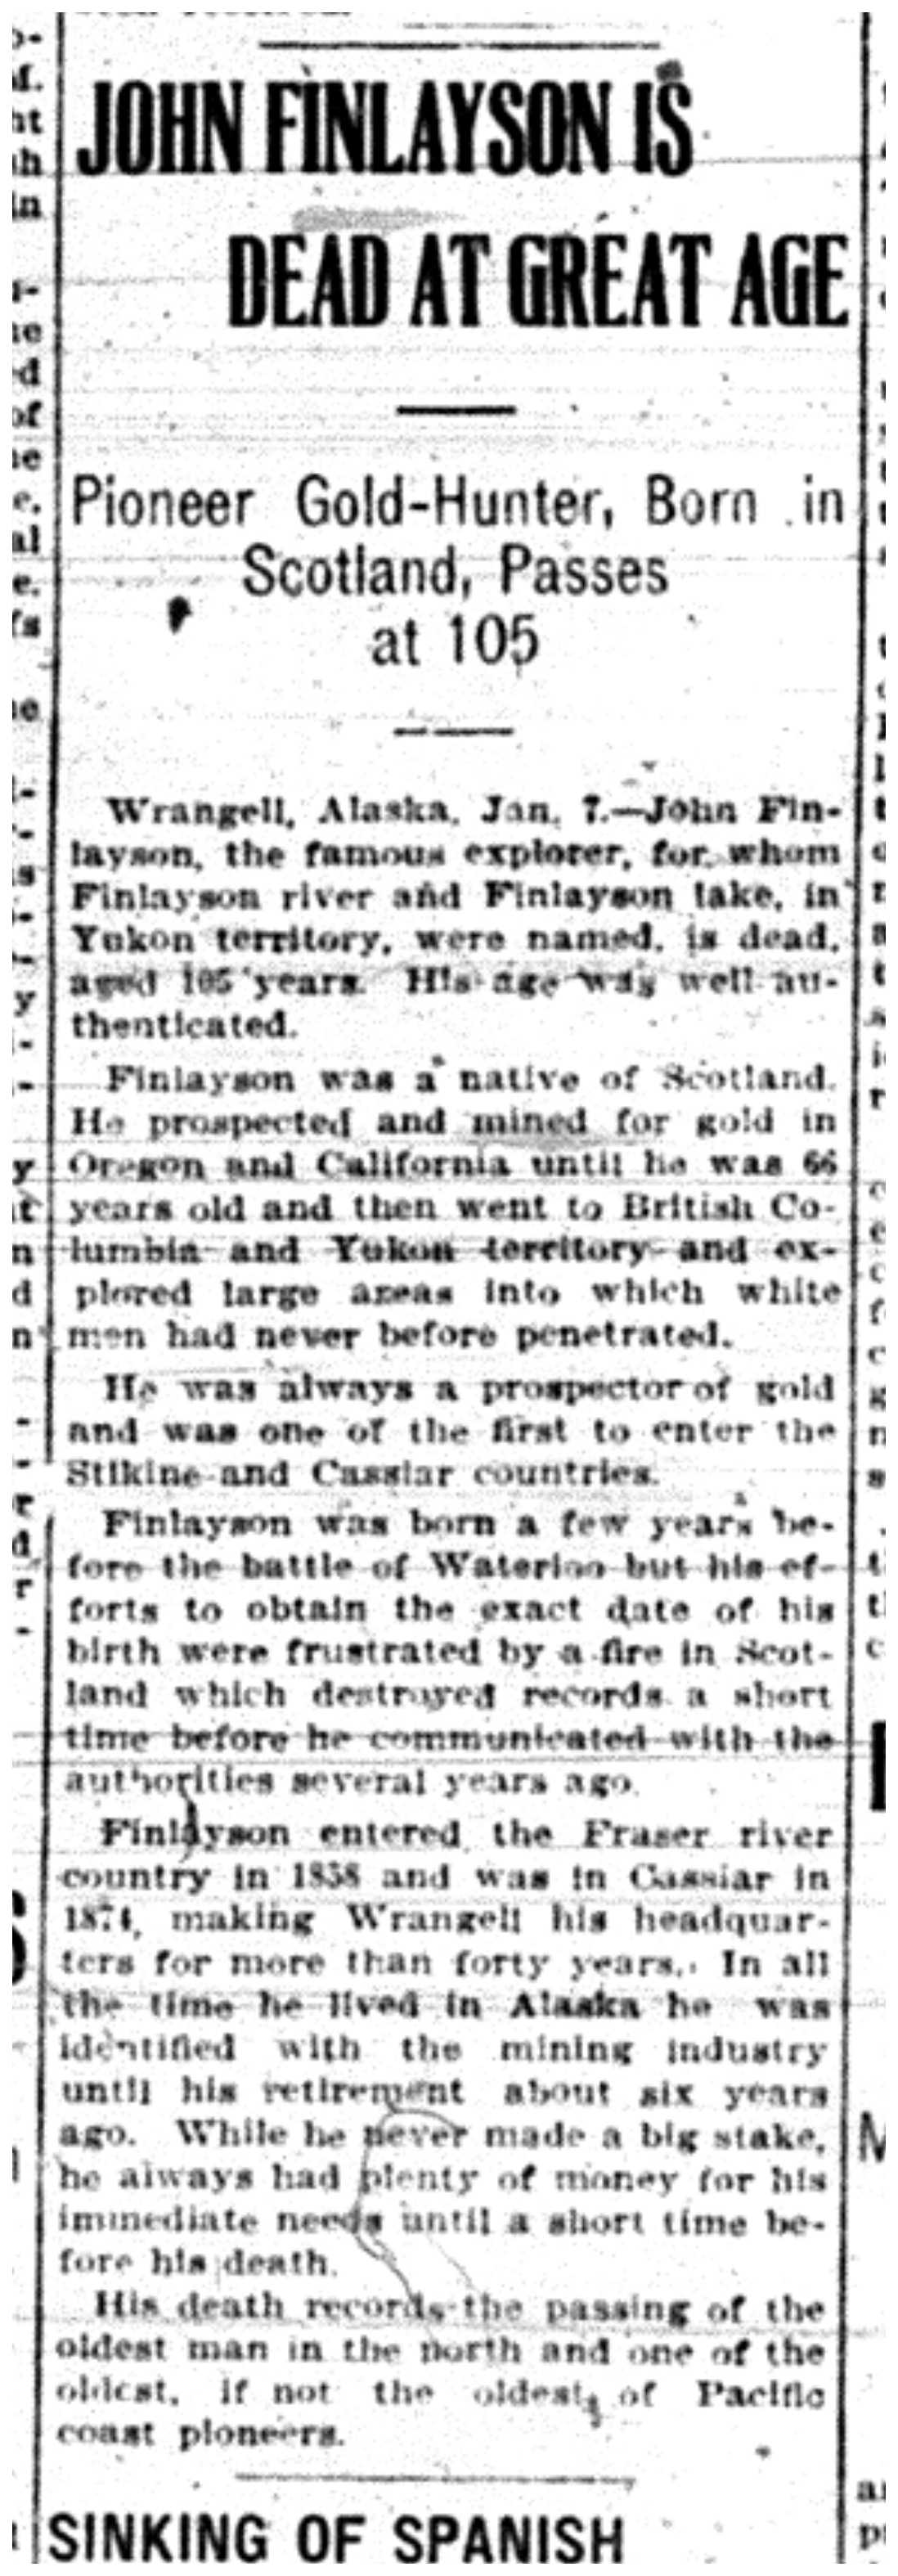 "John Finlayson is Dead at Great Age"